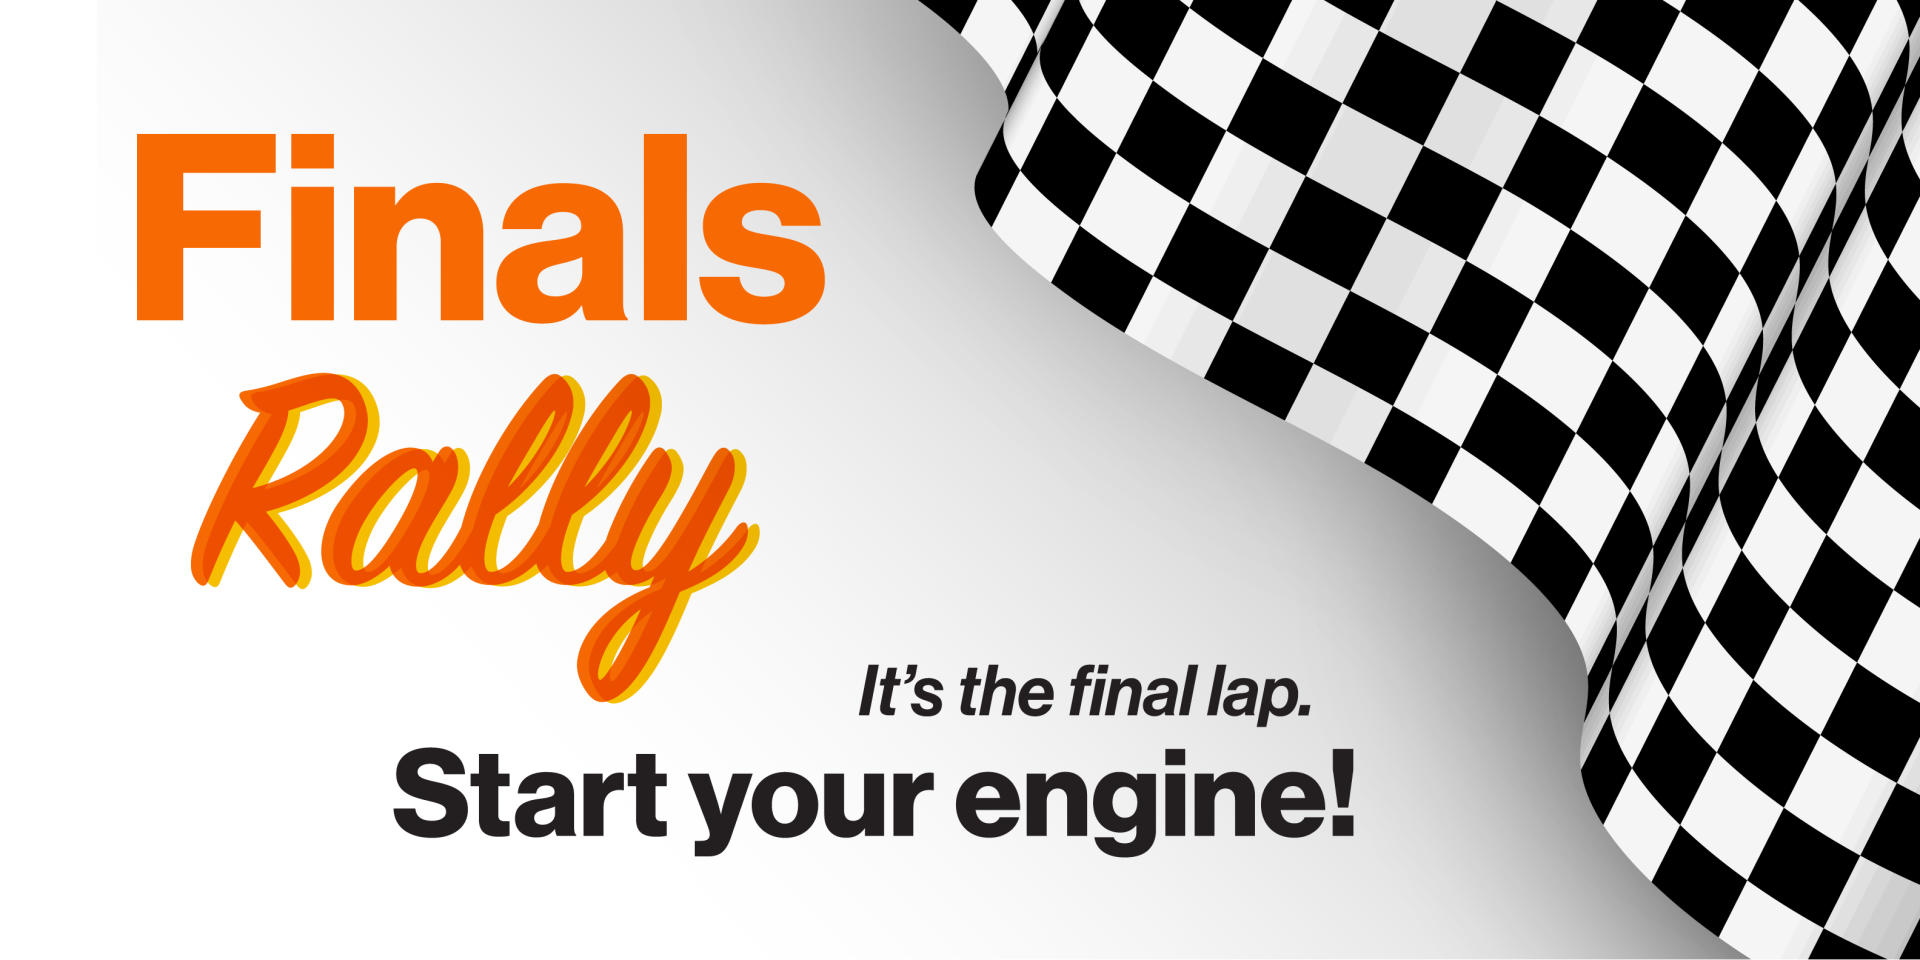 Finals Rally: It's the final lap. Start your engine!